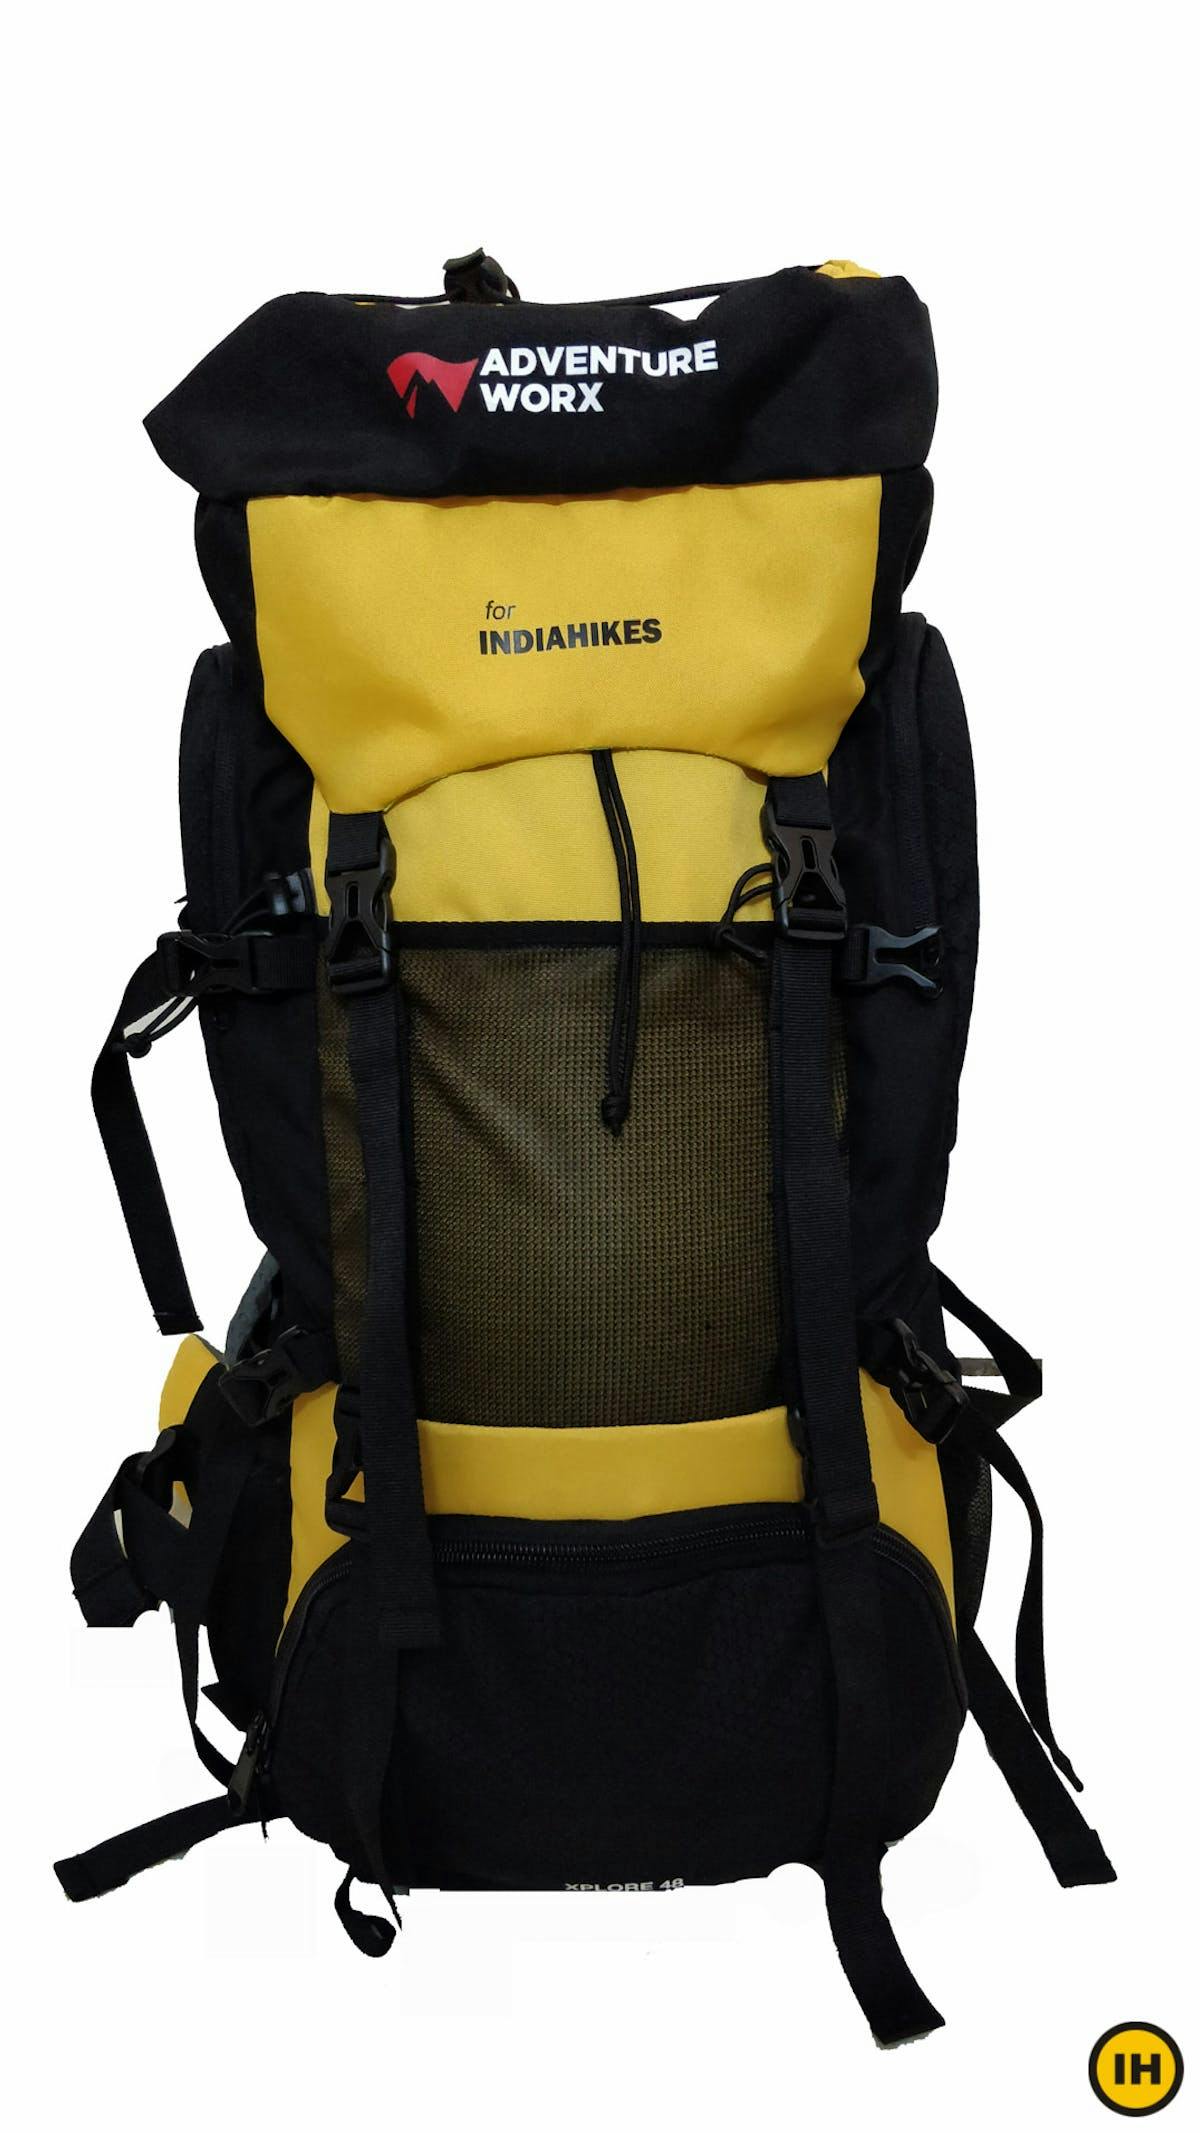 Adventure Worx for Indiahikes Backpack, trekking backpack, trek backpack, indiahikes rentals, rental backpack